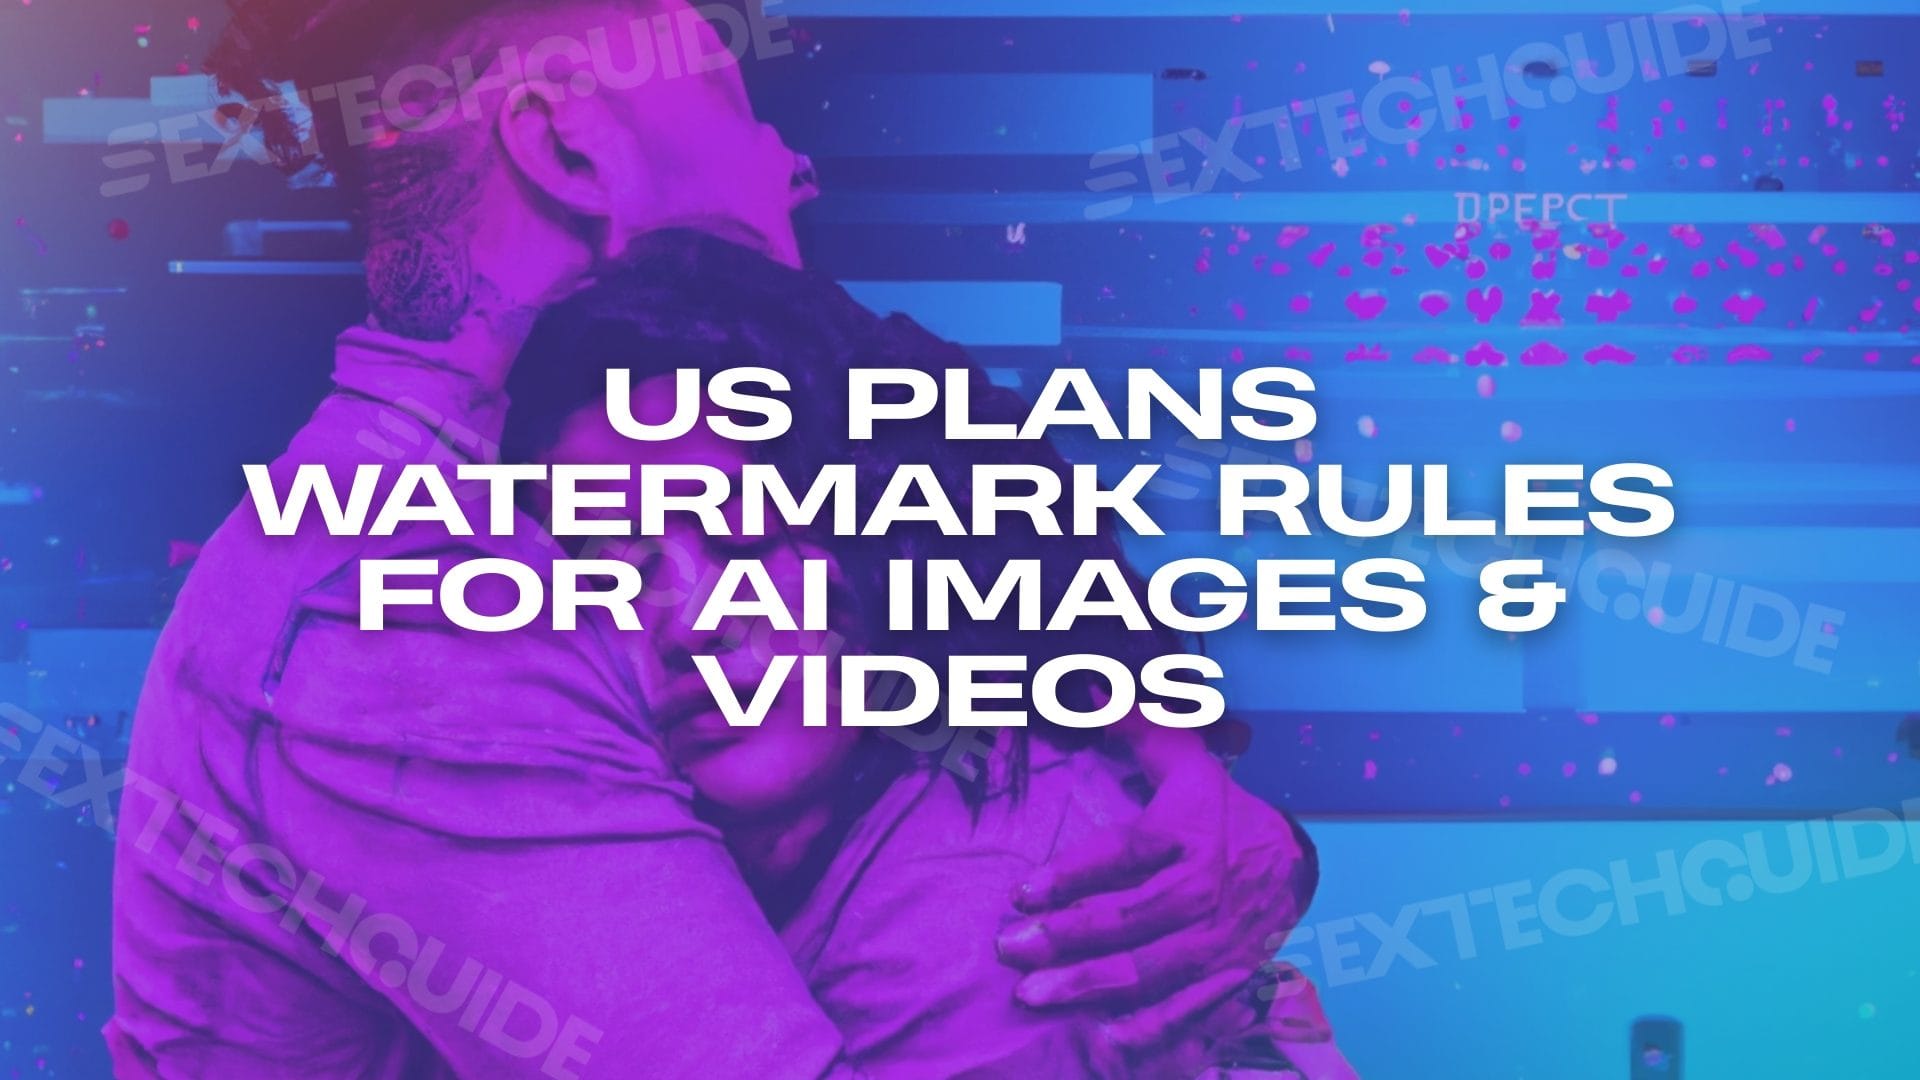 The US government plans to implement watermark rules for AI-generated images and videos, as part of their efforts to combat the spread of deepfake content.